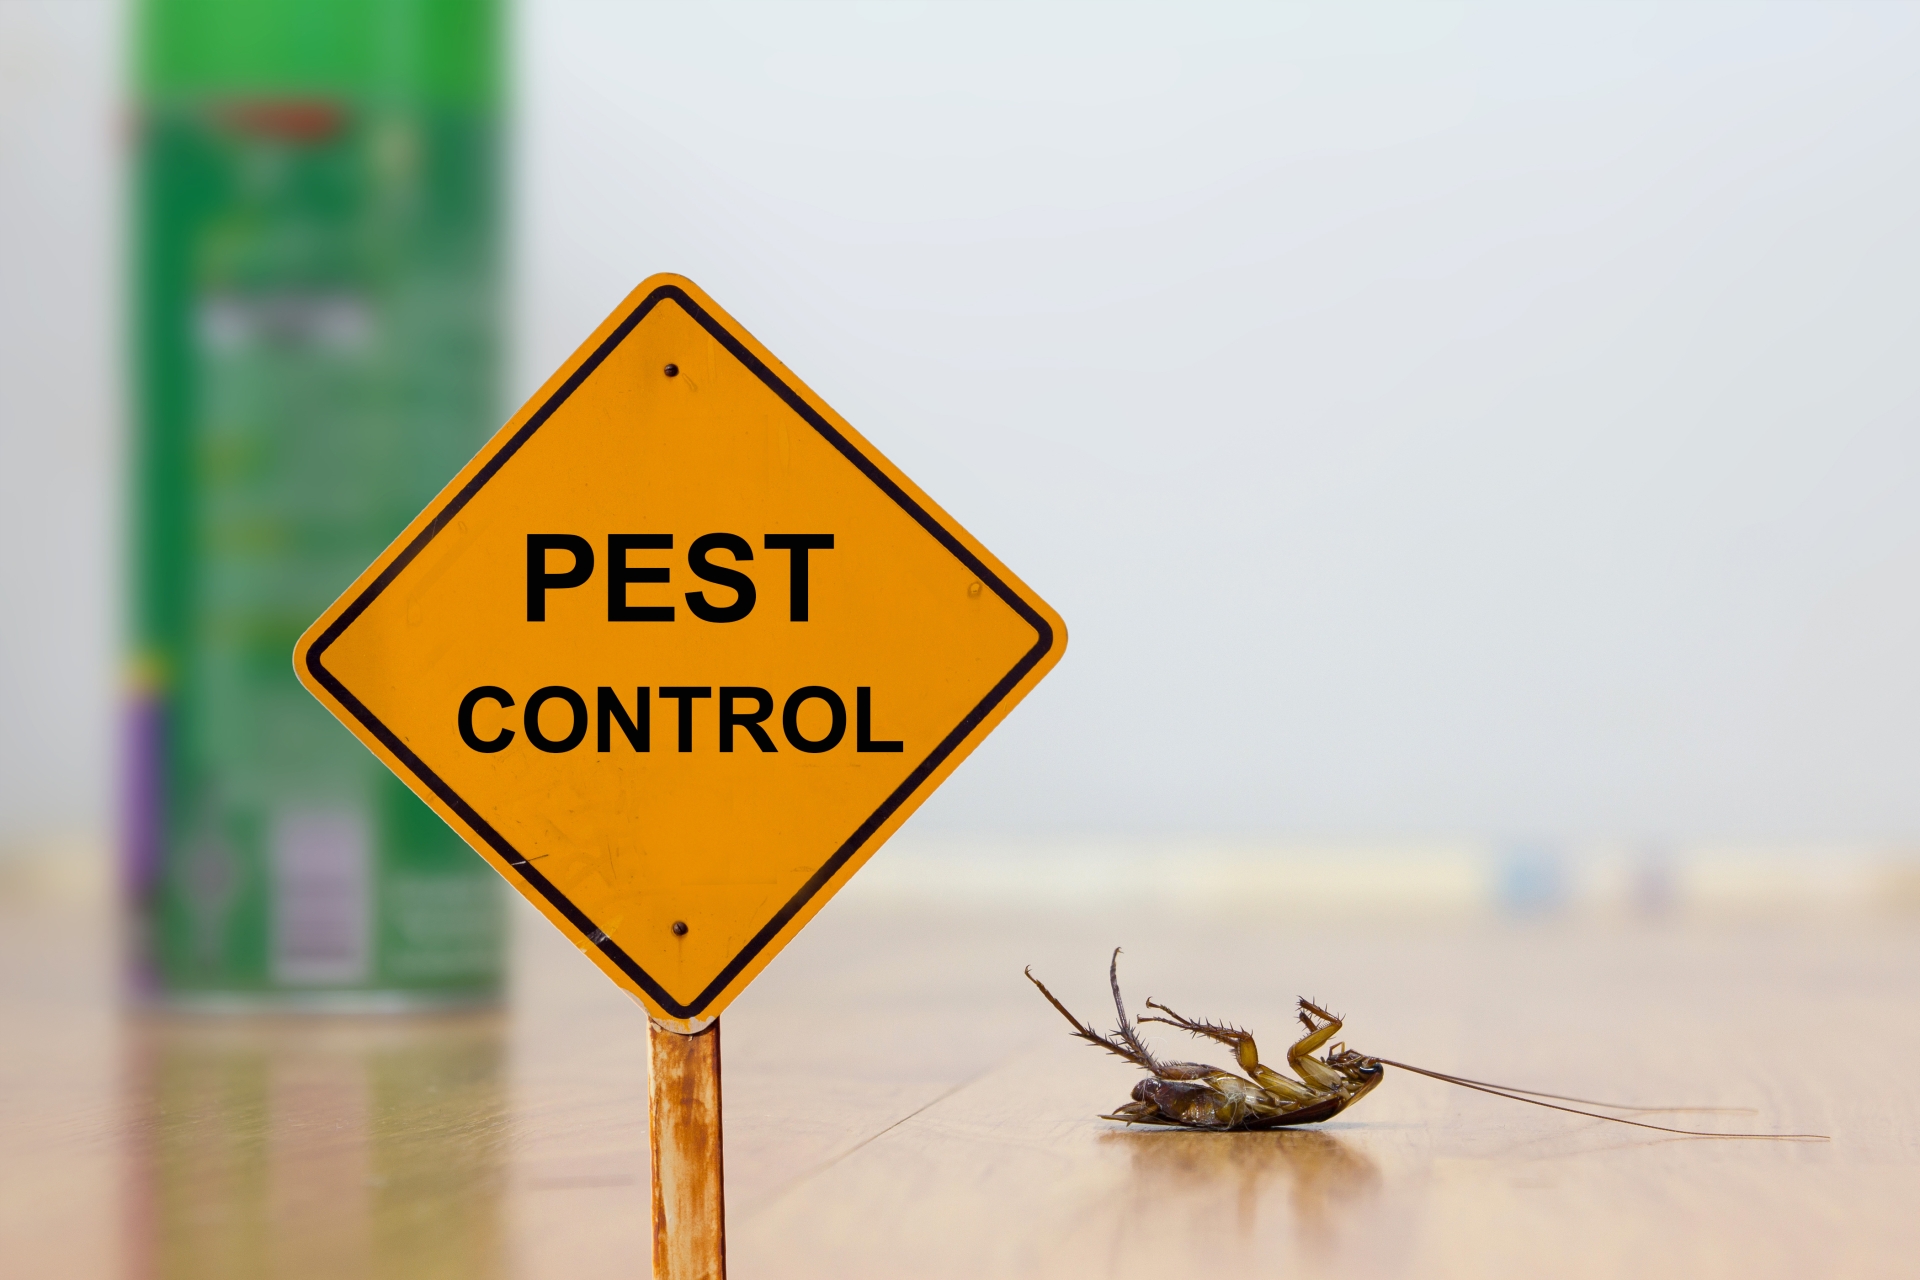 24 Hour Pest Control, Pest Control in Ashford, TW15. Call Now 020 8166 9746